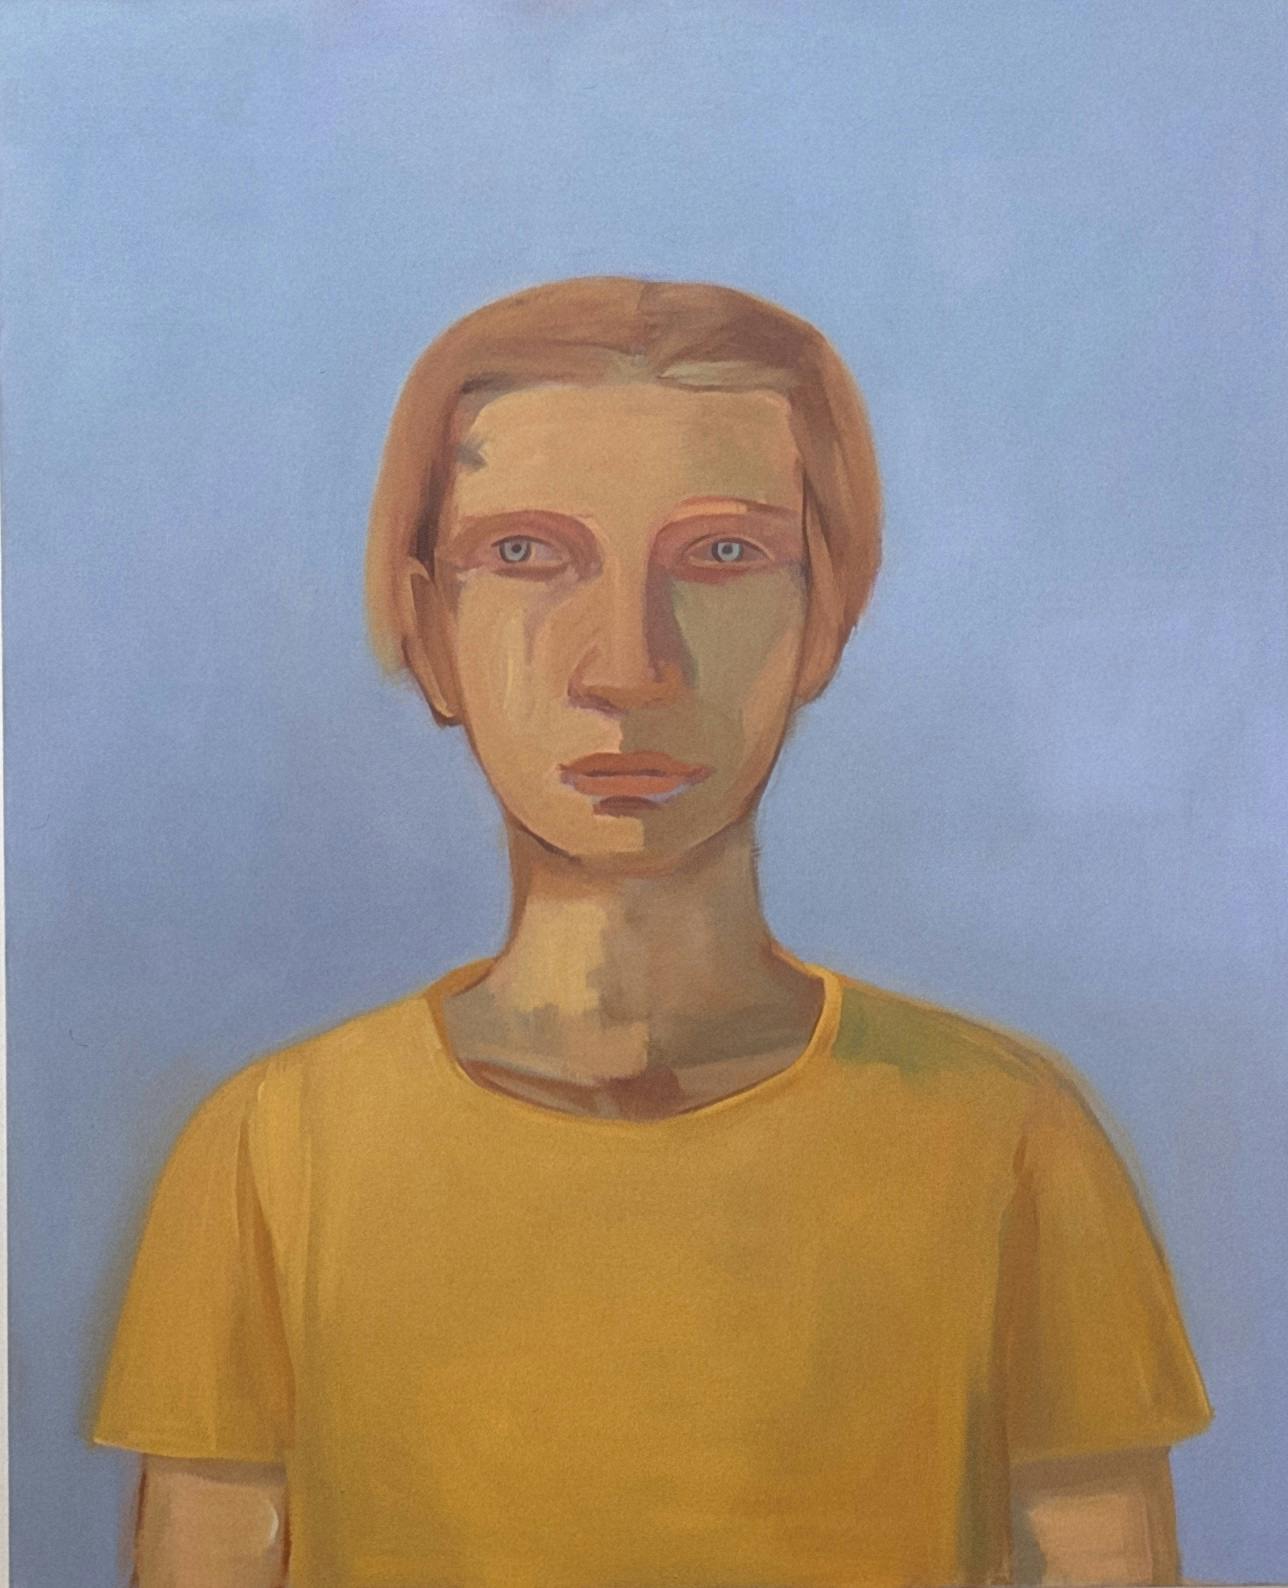 A painted portrait on canvas depicting a person wearing a yellow T-shirt on a light blue background. 